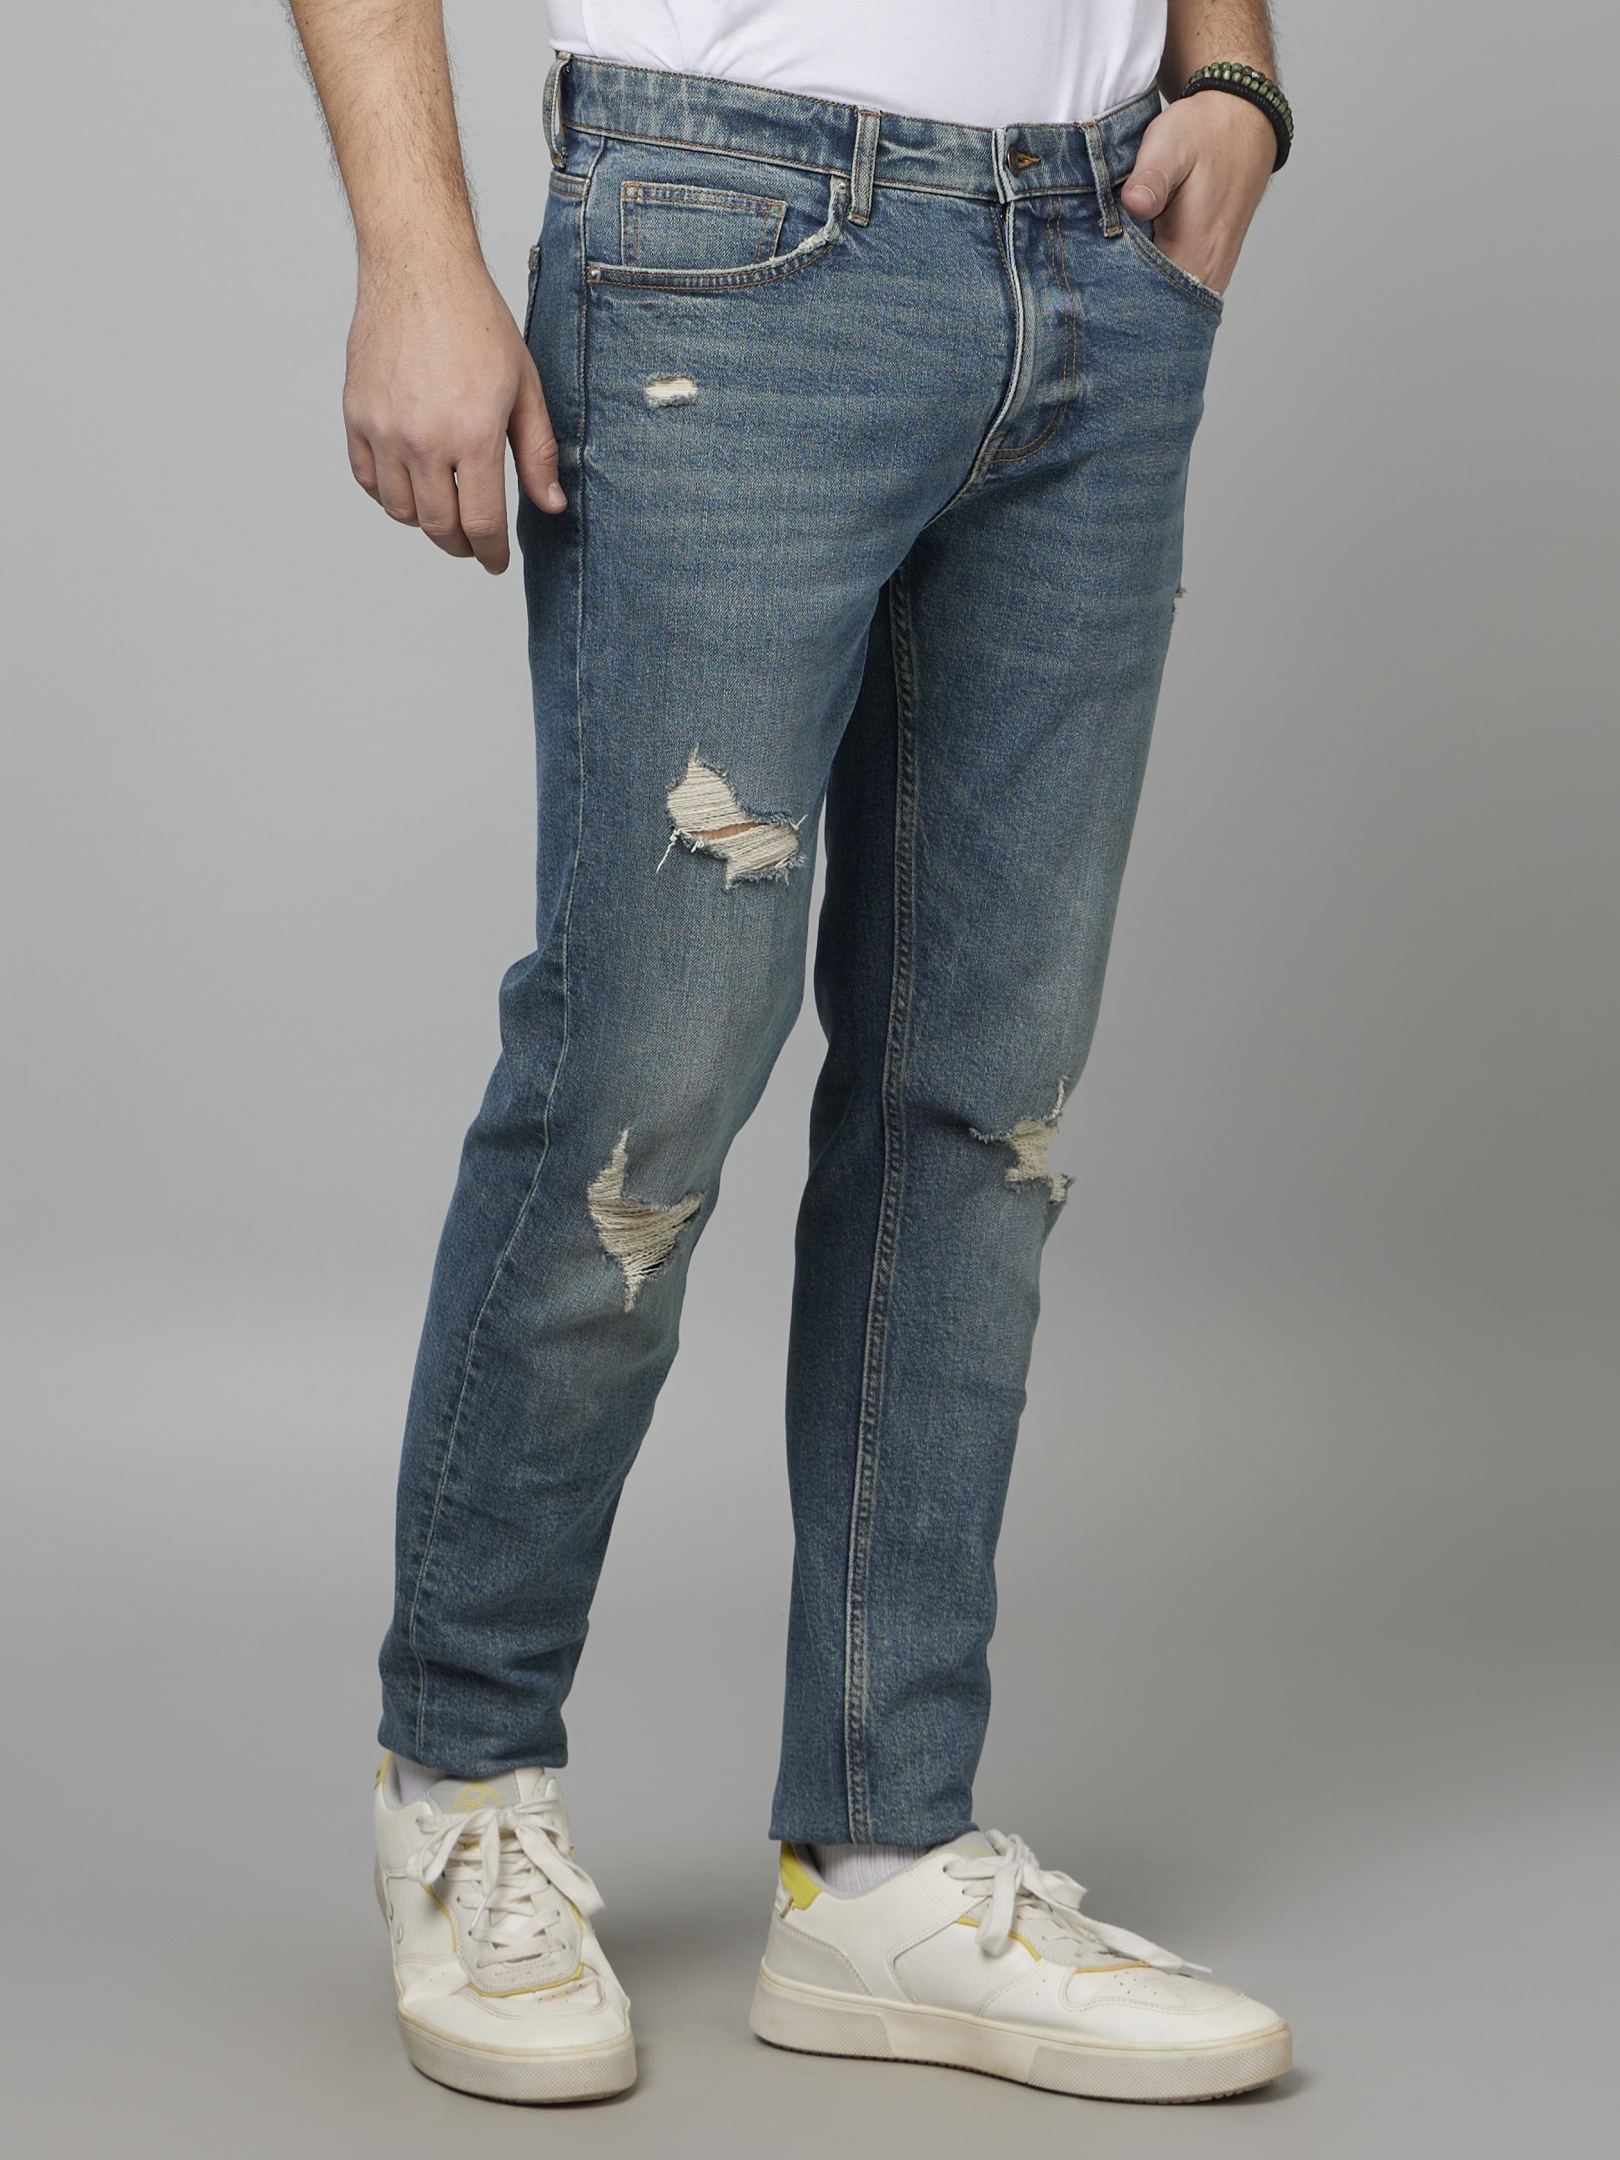 Buy Blue Ripped Jeans Men In India At Best Prices Online | Tata CLiQ